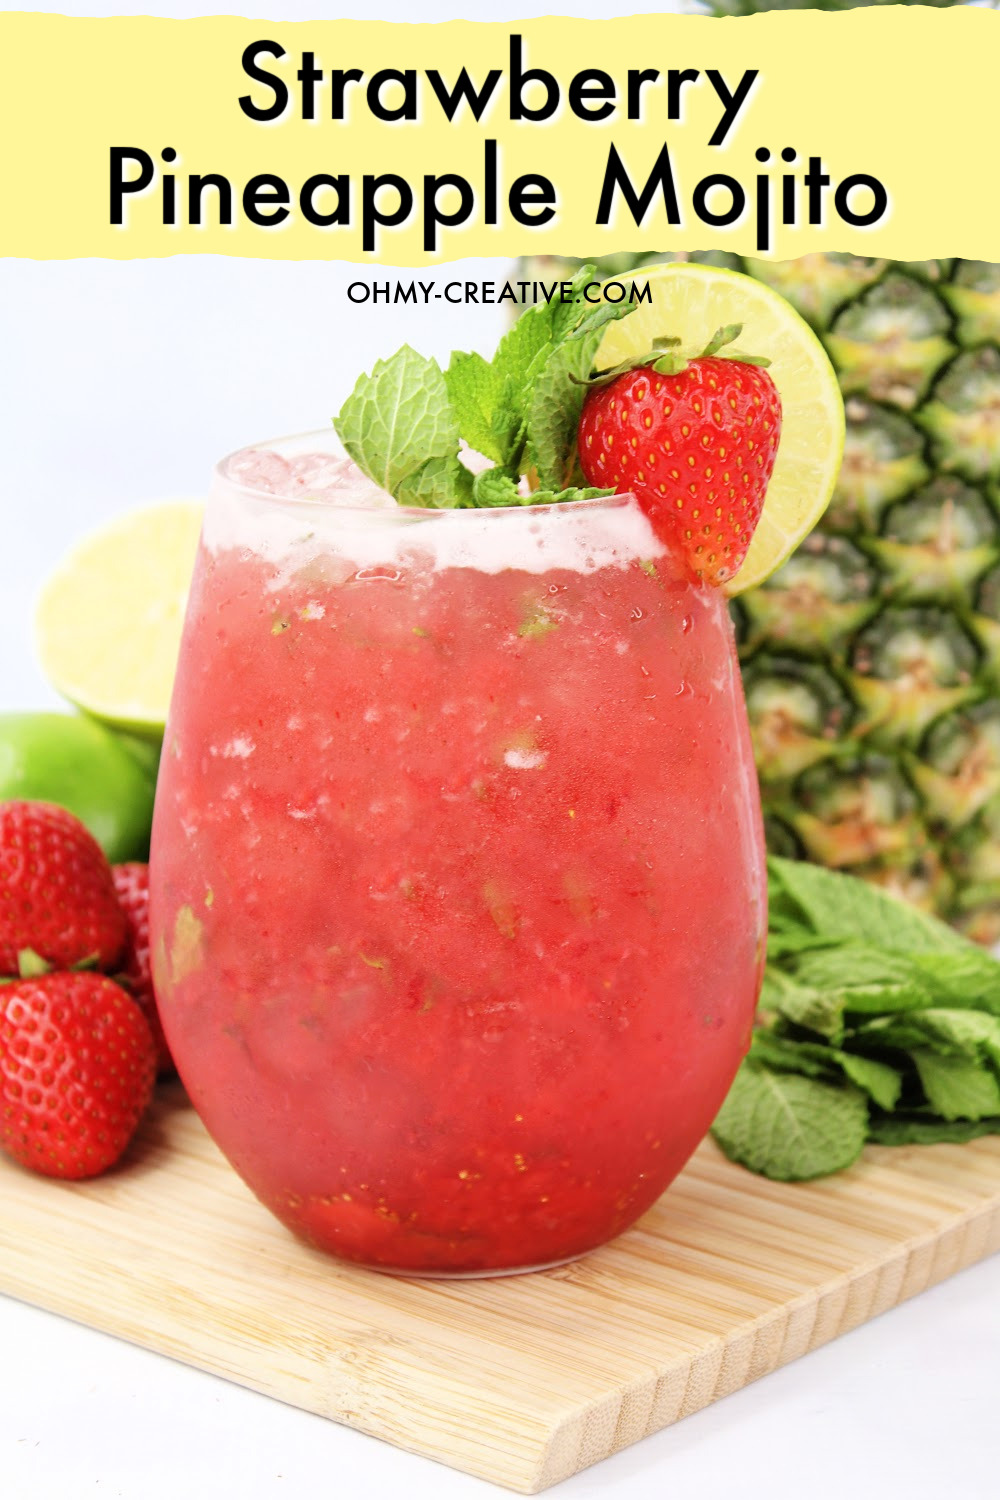 This Strawberry Pineapple Mojito cocktail is garnished with strawberry and mint. It is sitting on a wooden cutting board surrounded by strawberries, limes and a whole pineapple. 